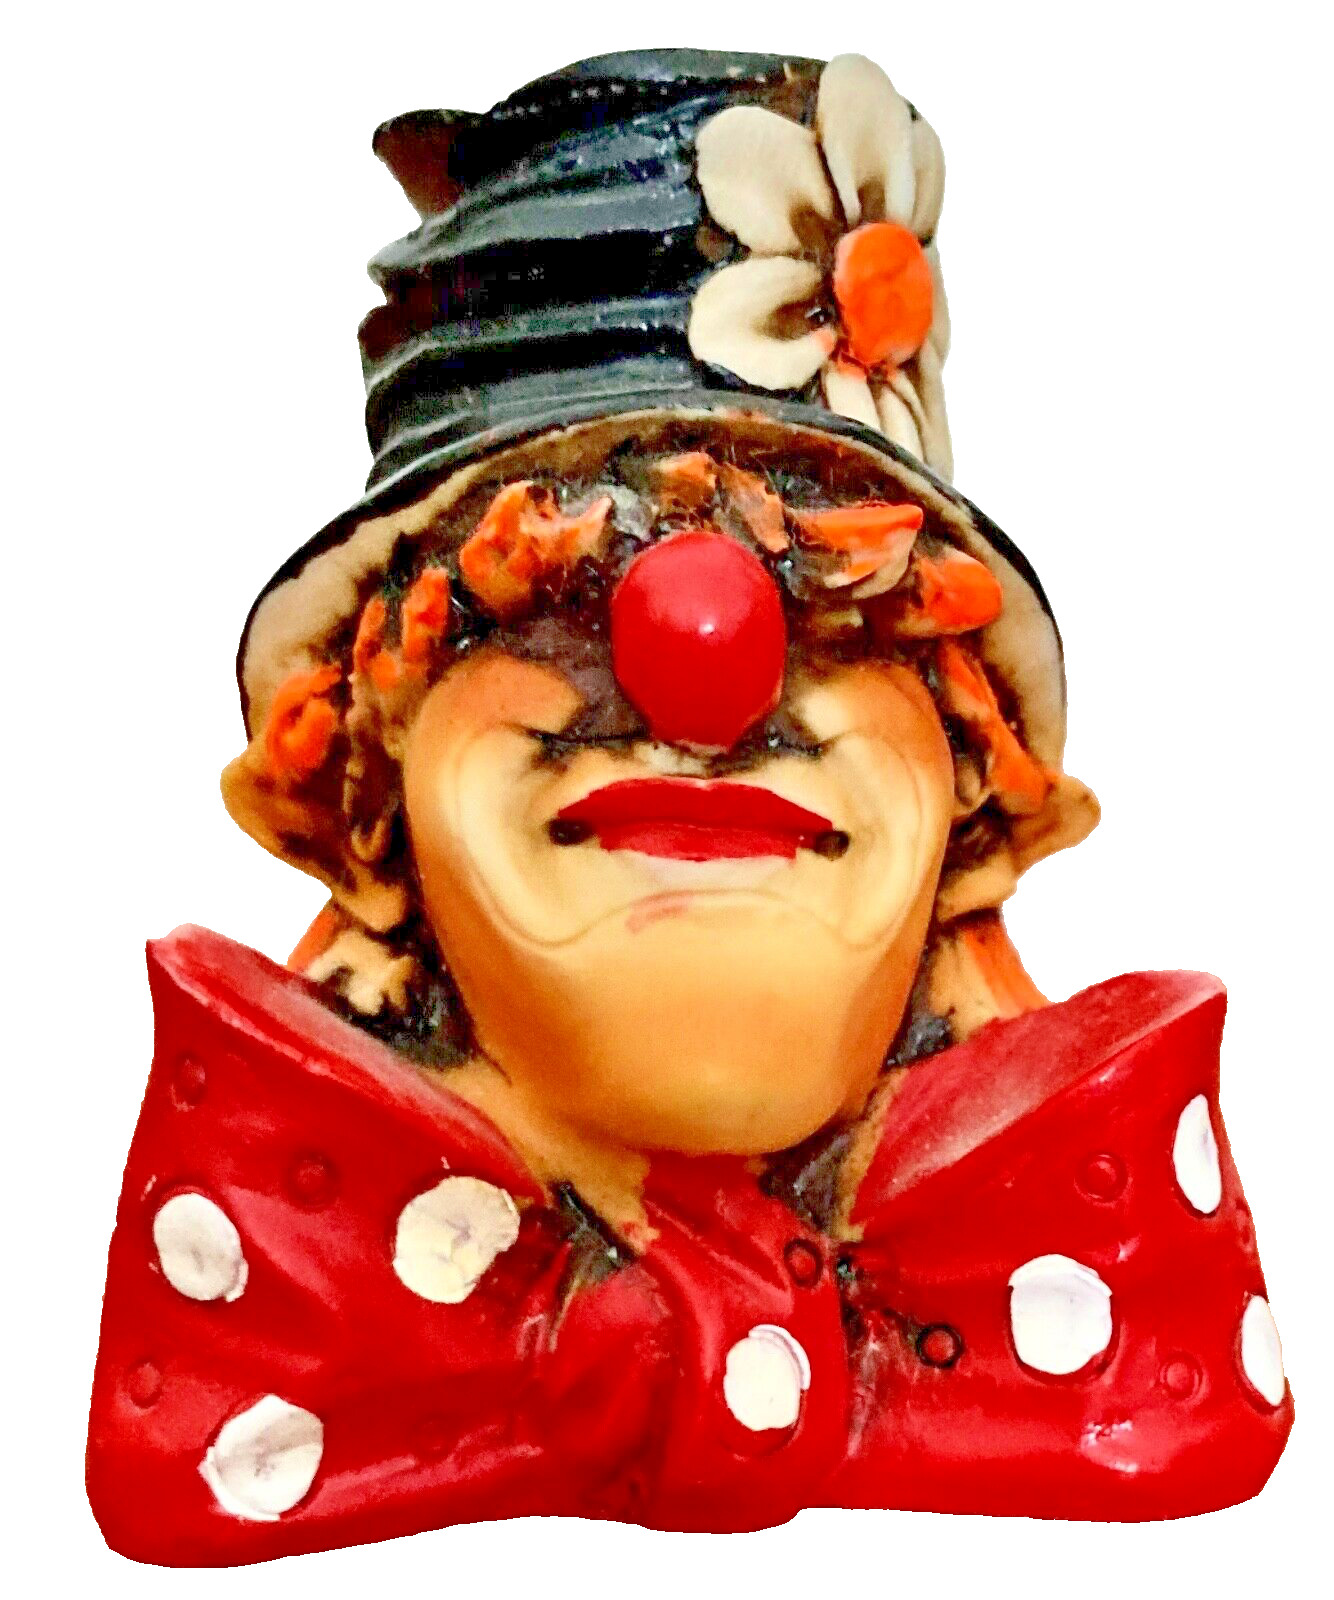 Vintage Artifice Ottanta Clown Figurine Made of Wood In Italy